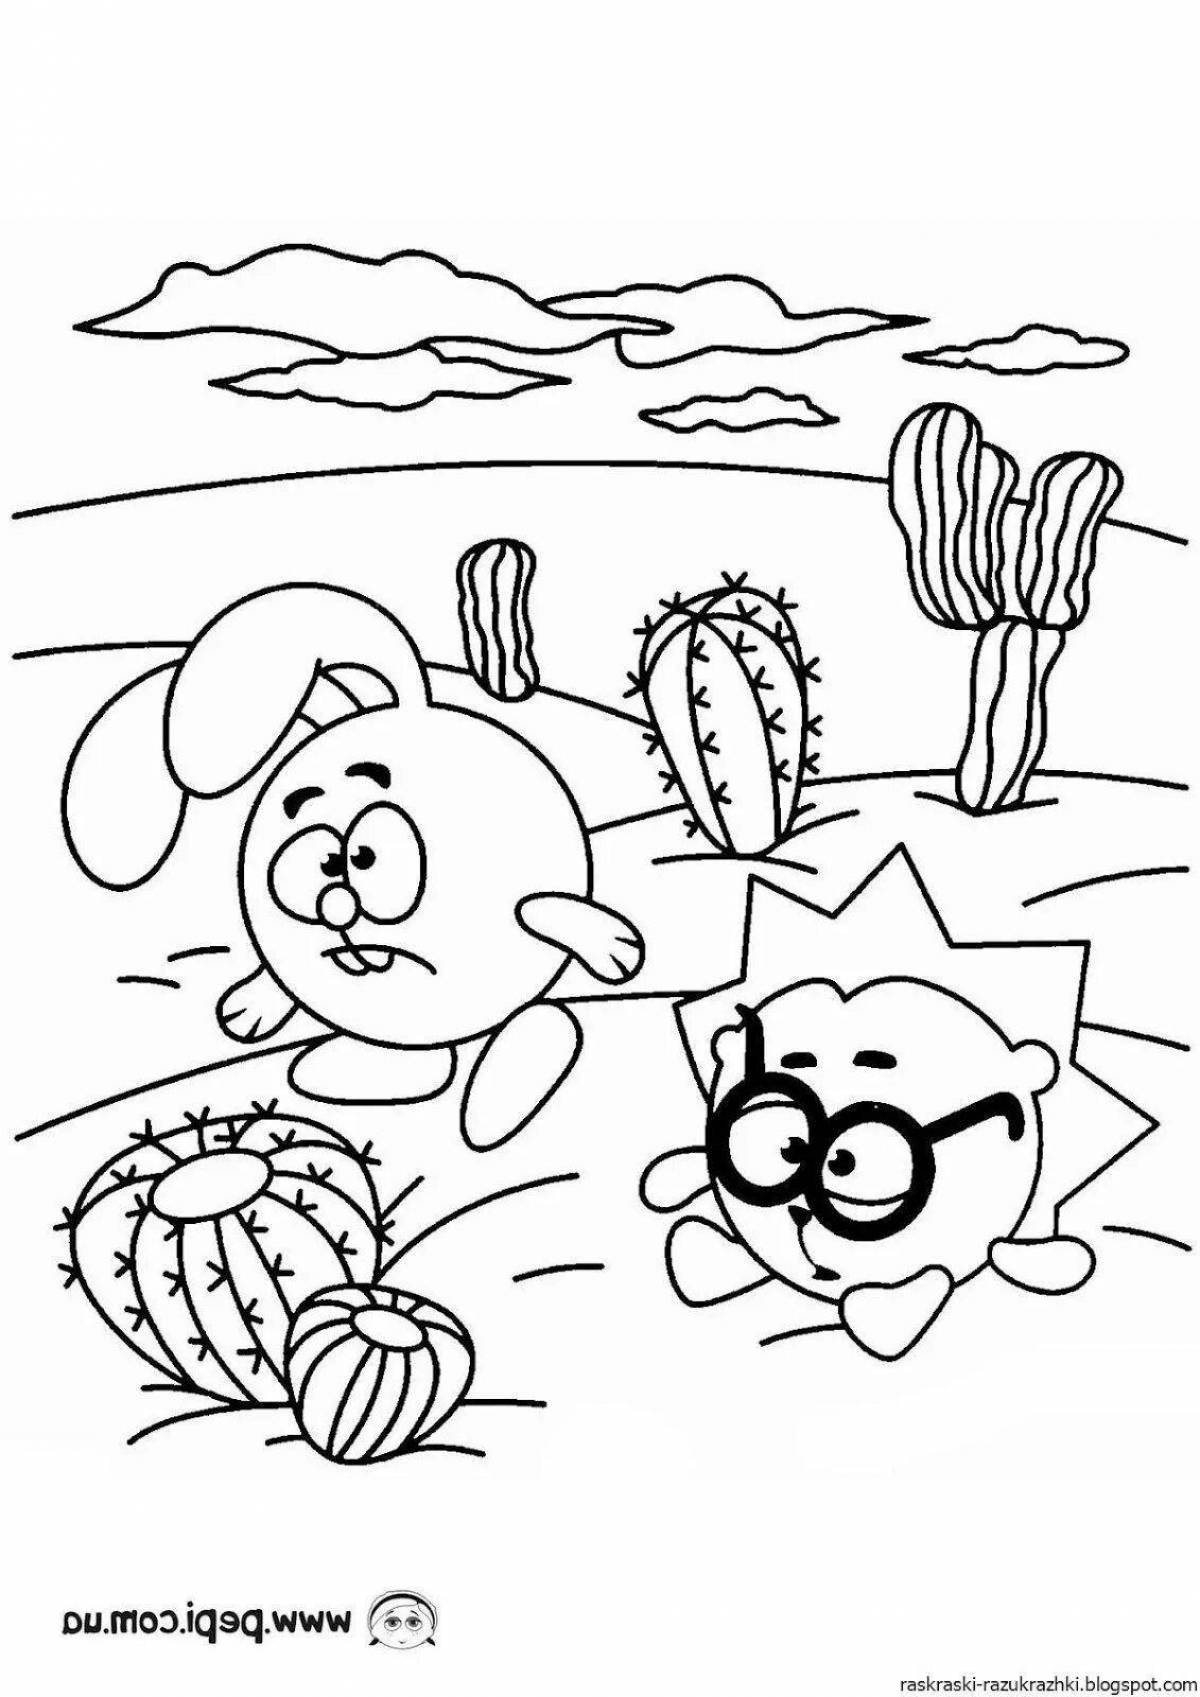 Fun coloring pdf for the little ones